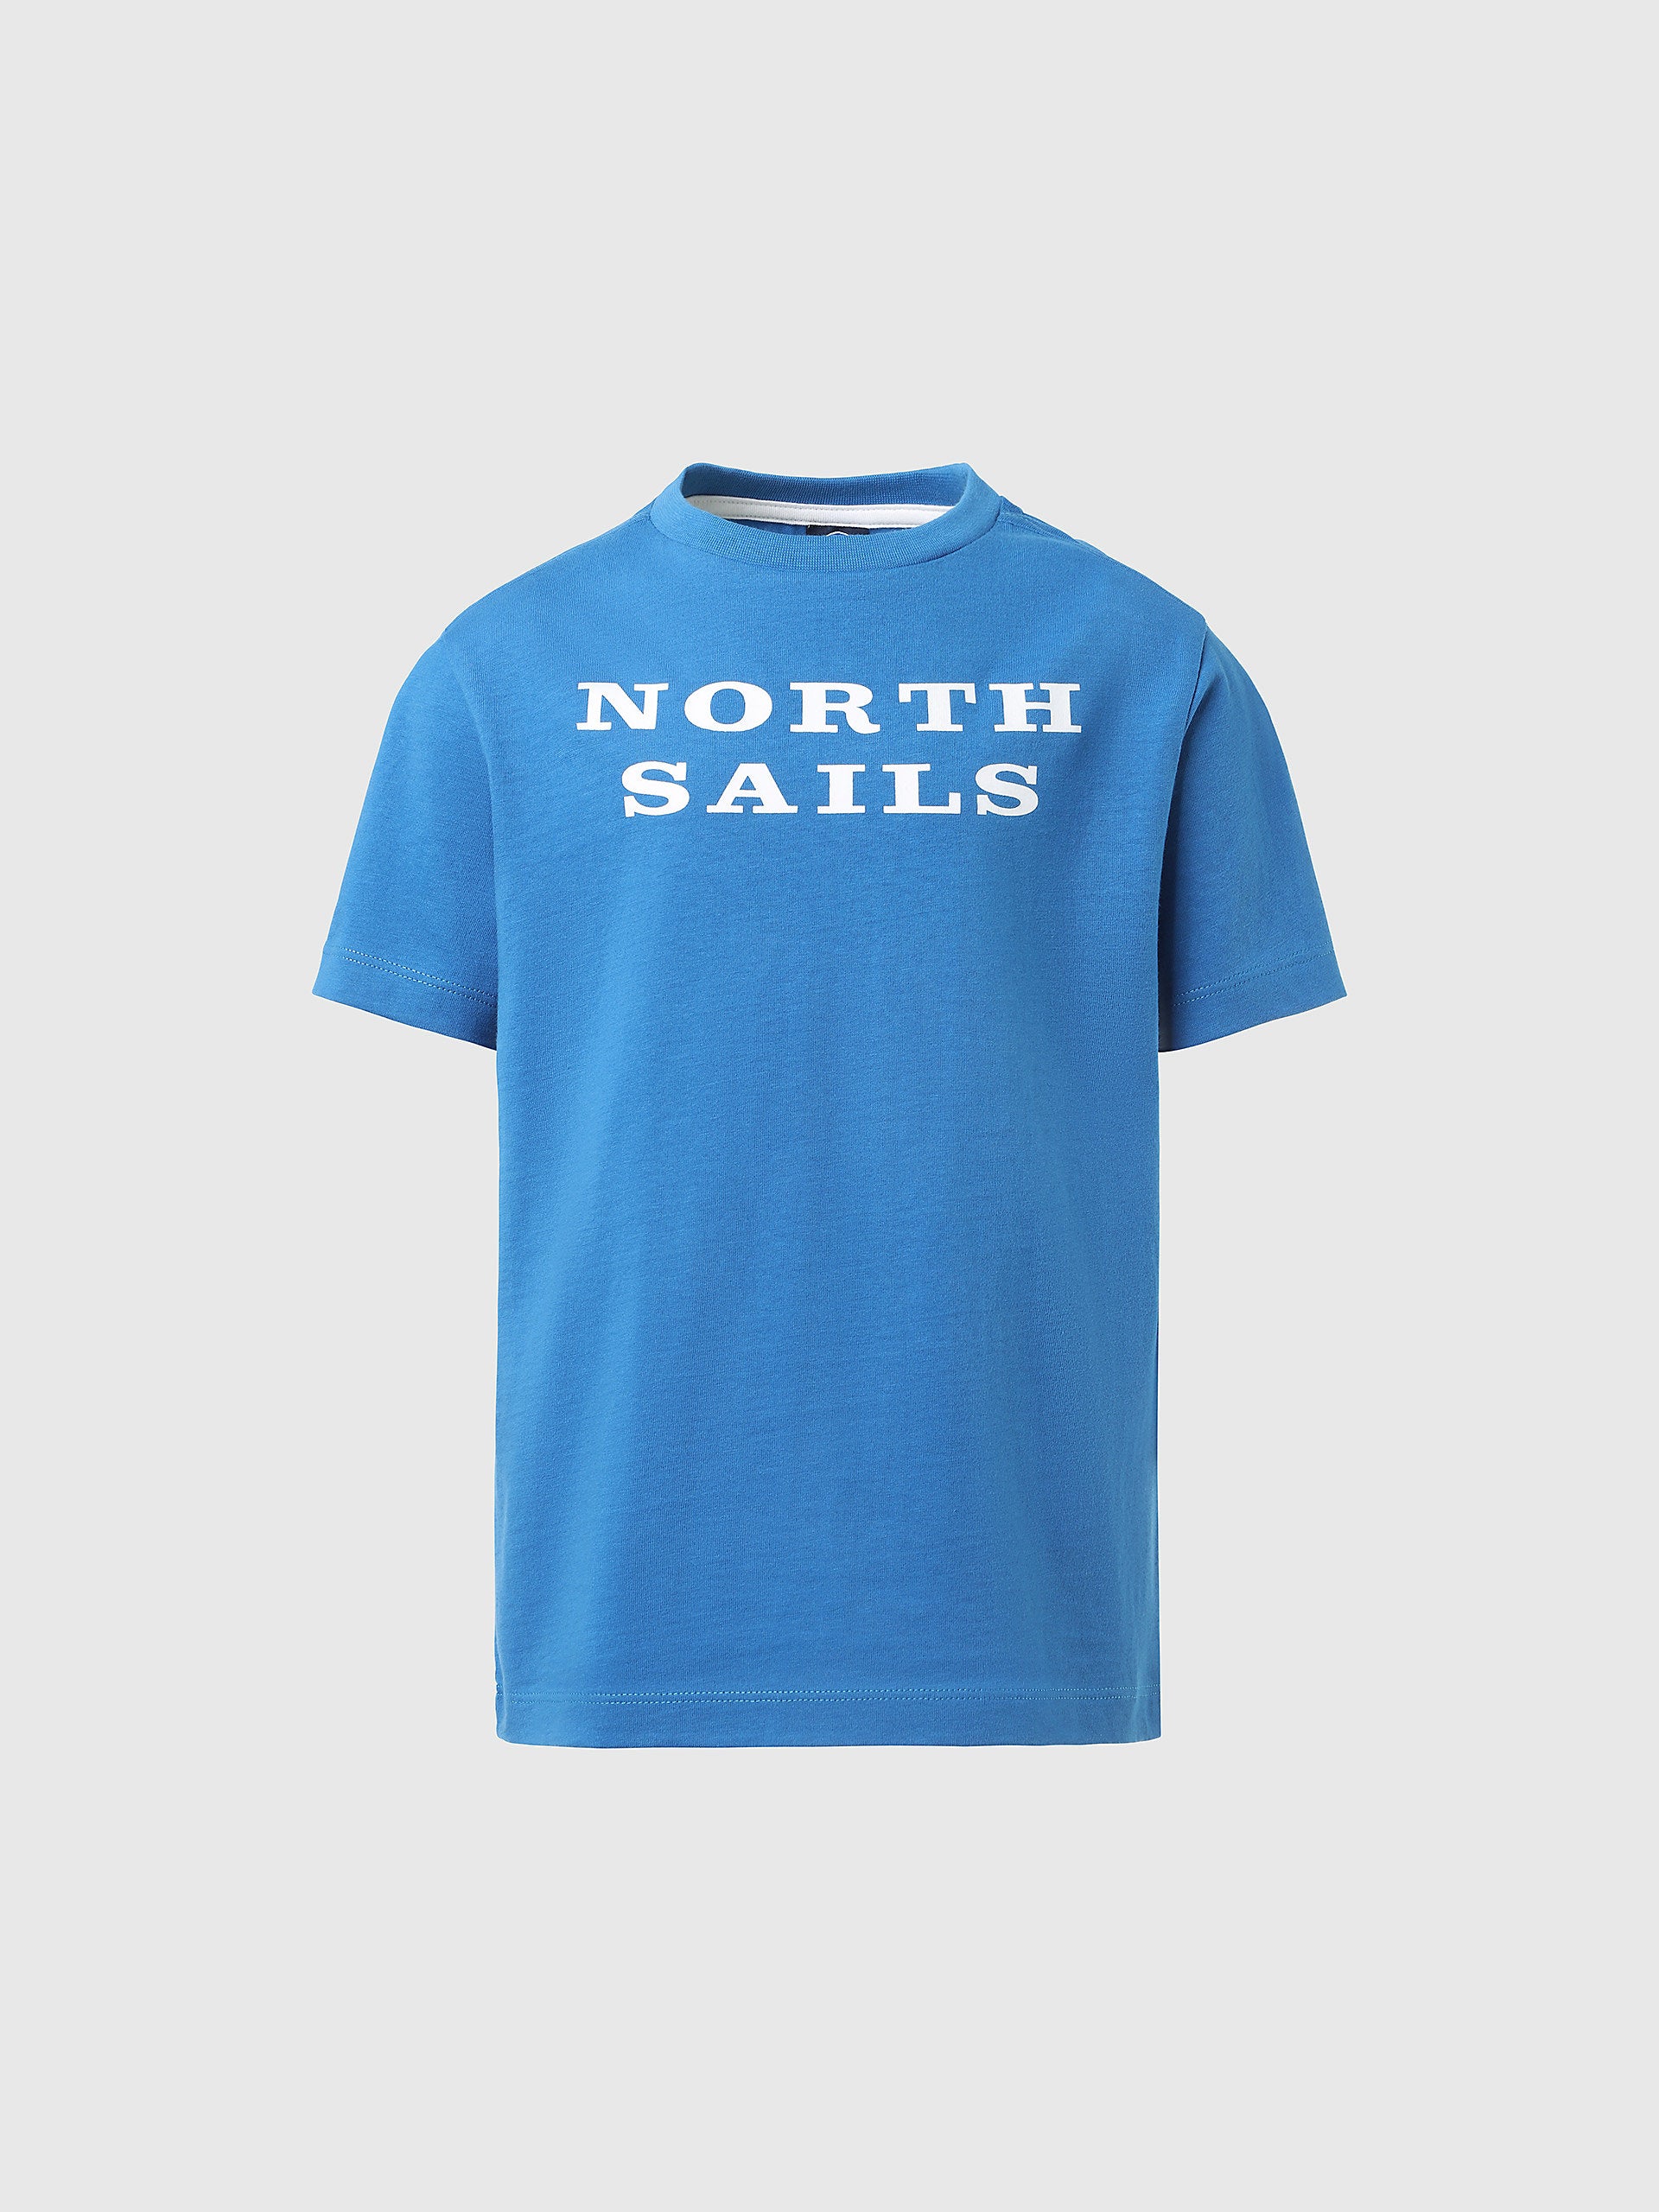 North Sails - T-shirt with chest printNorth SailsRoyal4